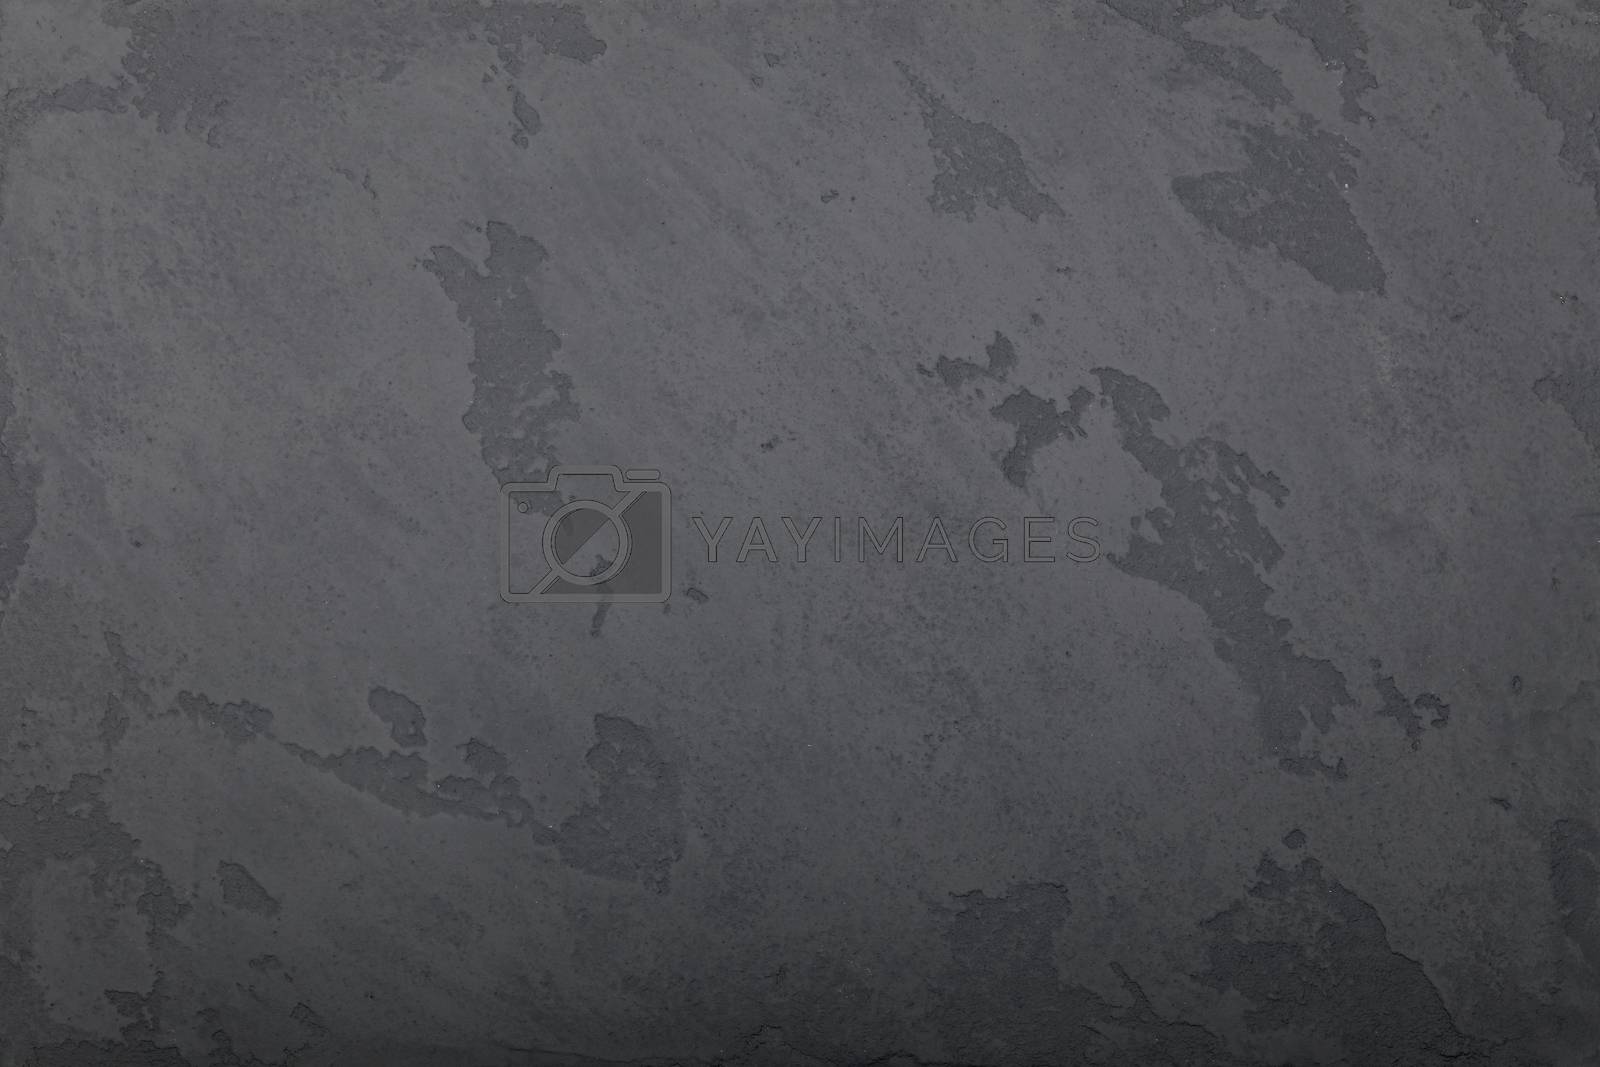 Royalty free image of Grunge grey painted plaster wall background by BreakingTheWalls